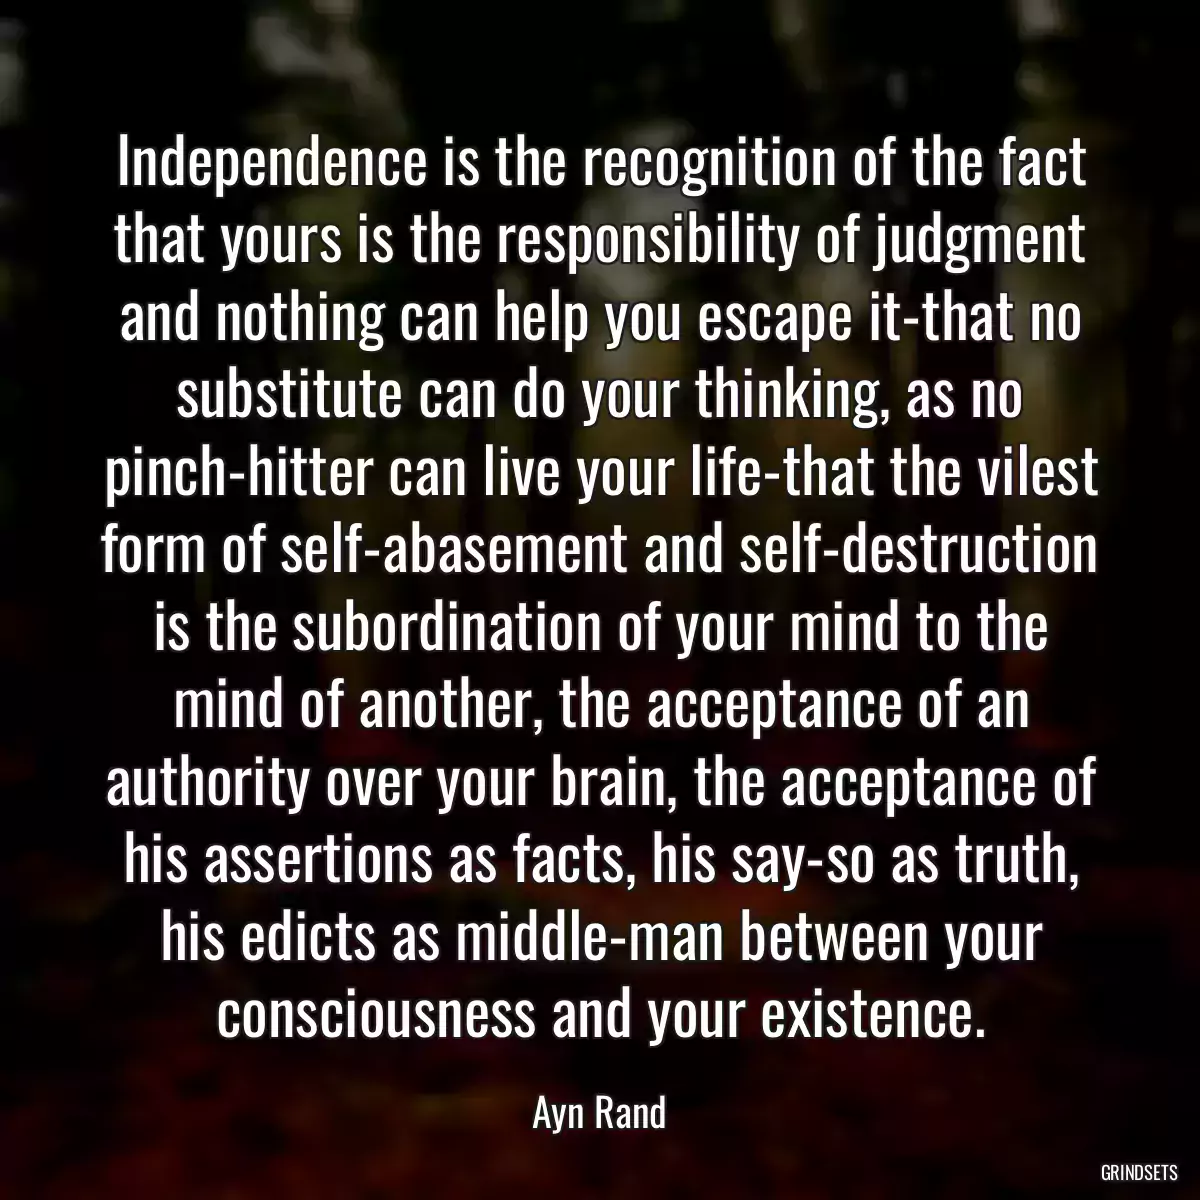 Independence is the recognition of the fact that yours is the responsibility of judgment and nothing can help you escape it-that no substitute can do your thinking, as no pinch-hitter can live your life-that the vilest form of self-abasement and self-destruction is the subordination of your mind to the mind of another, the acceptance of an authority over your brain, the acceptance of his assertions as facts, his say-so as truth, his edicts as middle-man between your consciousness and your existence.